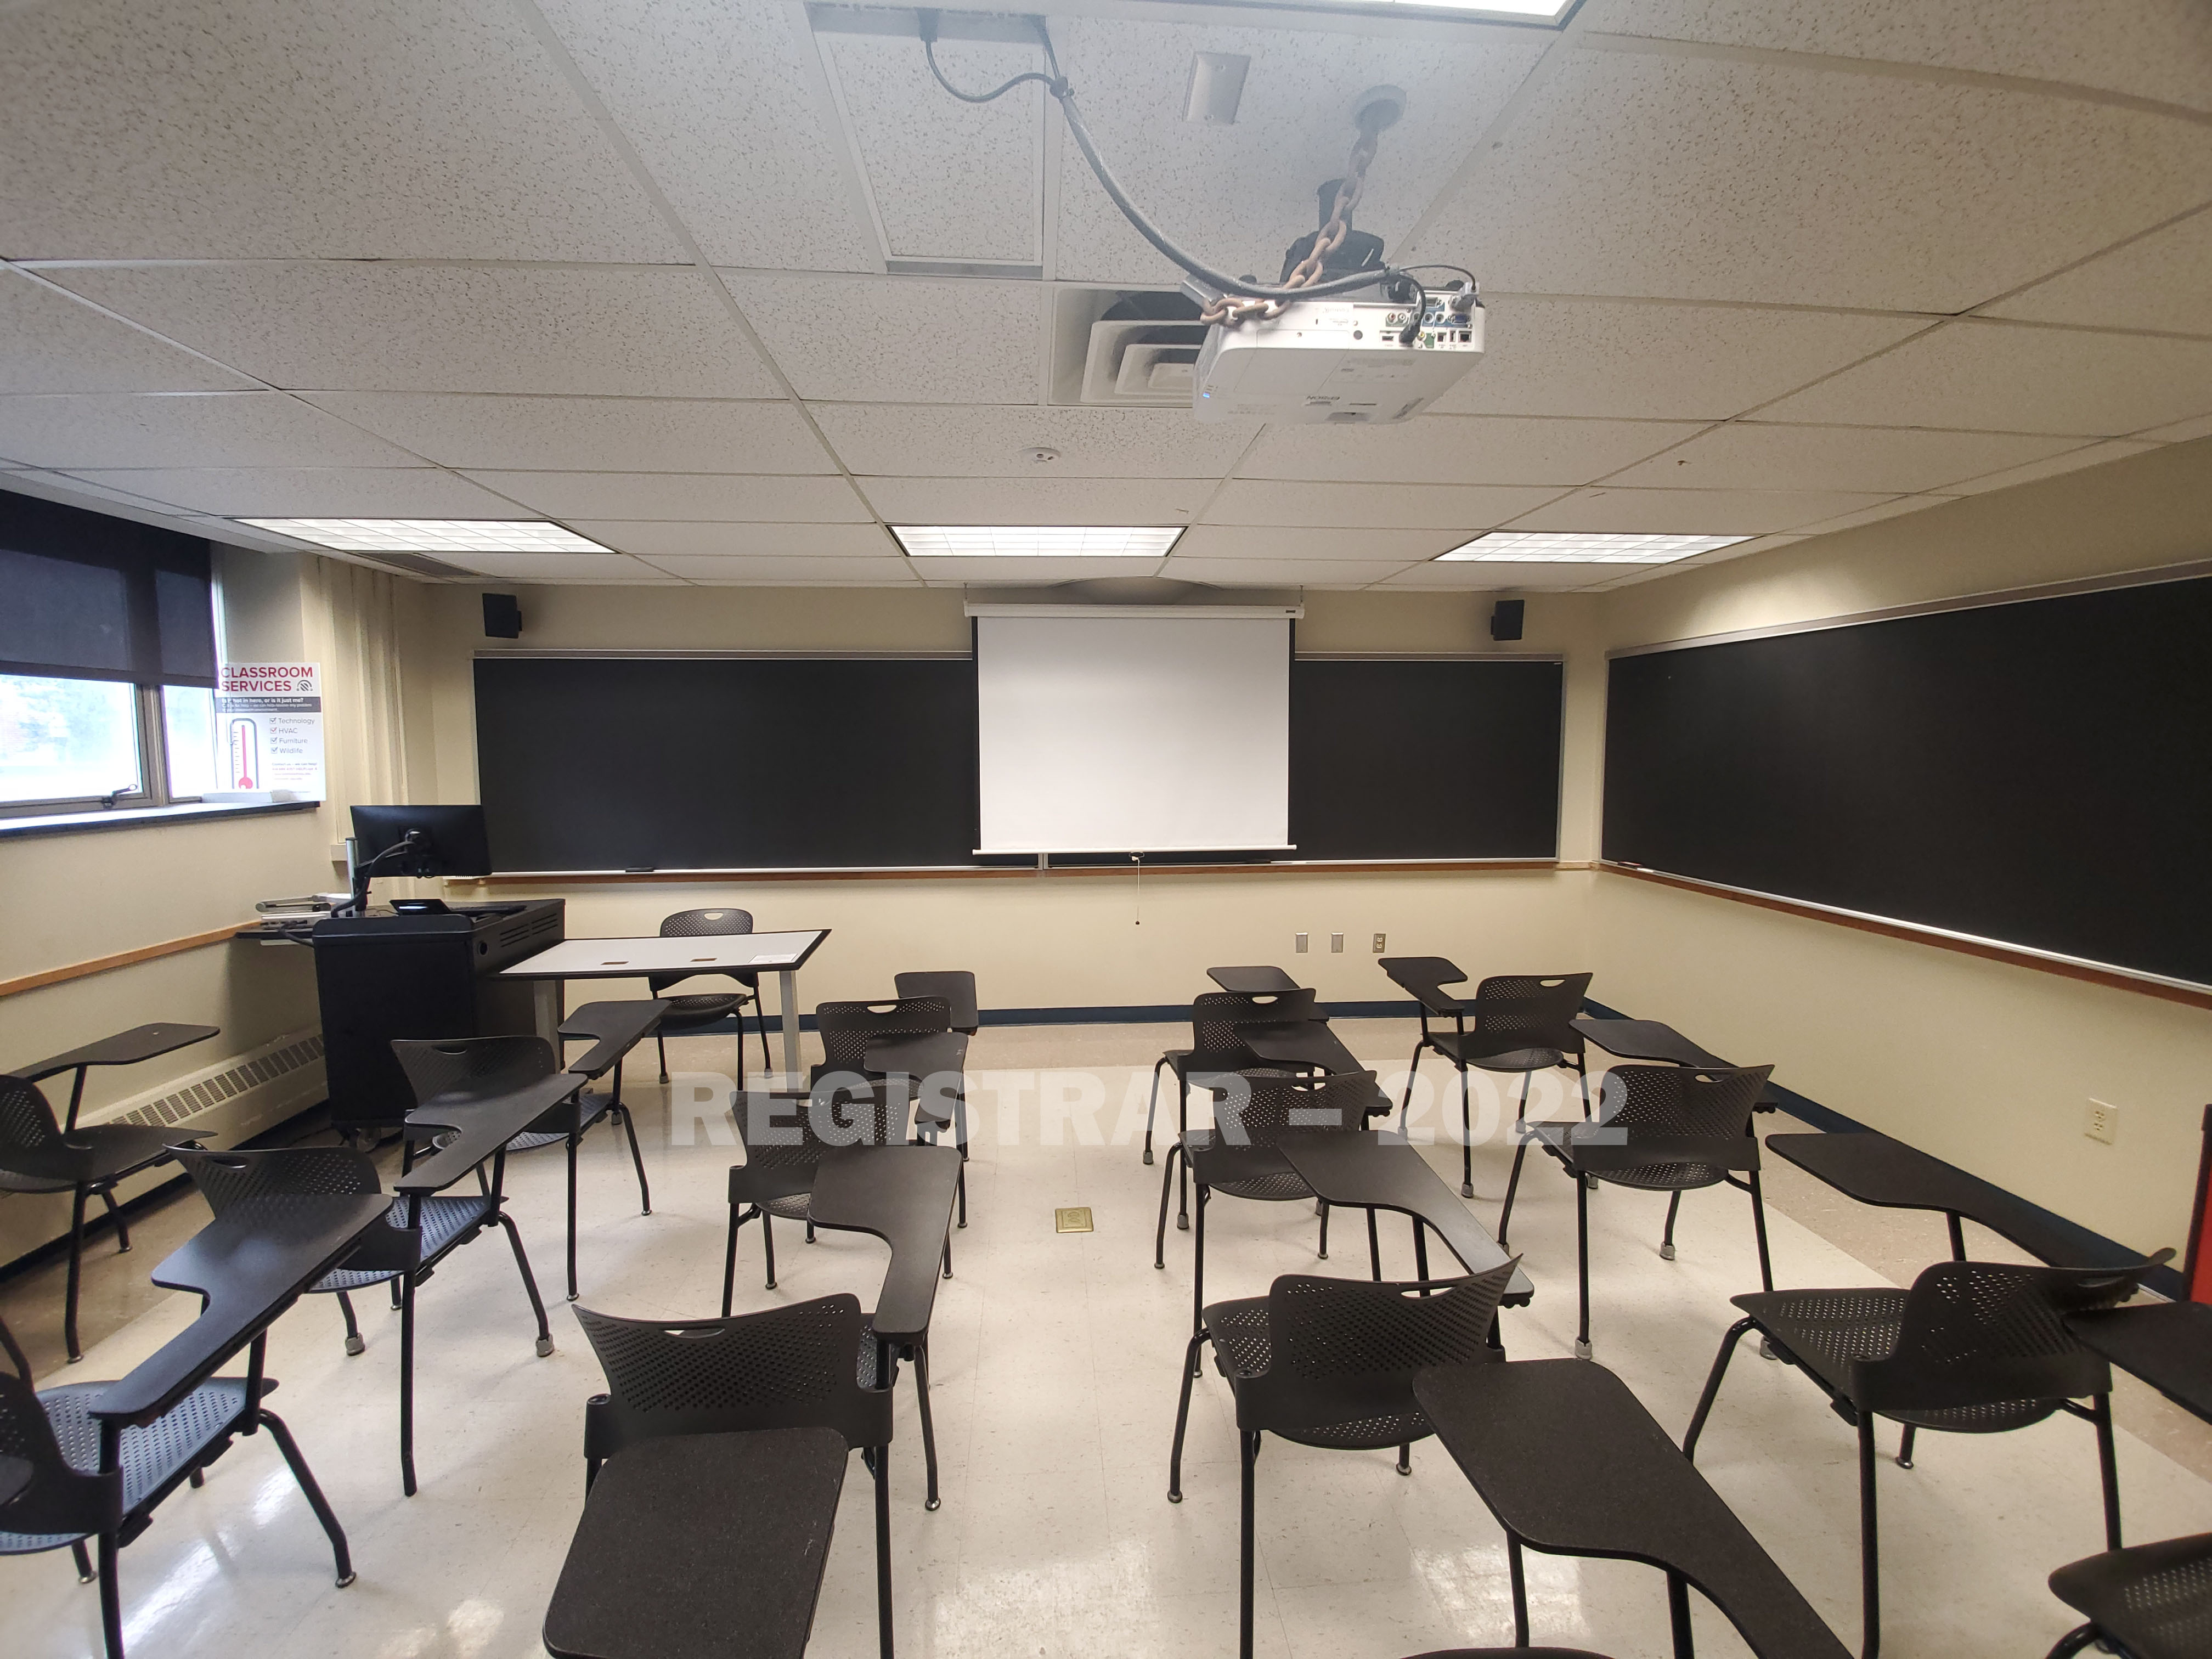 Enarson Classroom Building room 212 ultra wide angle view from the back of the room with projector screen down